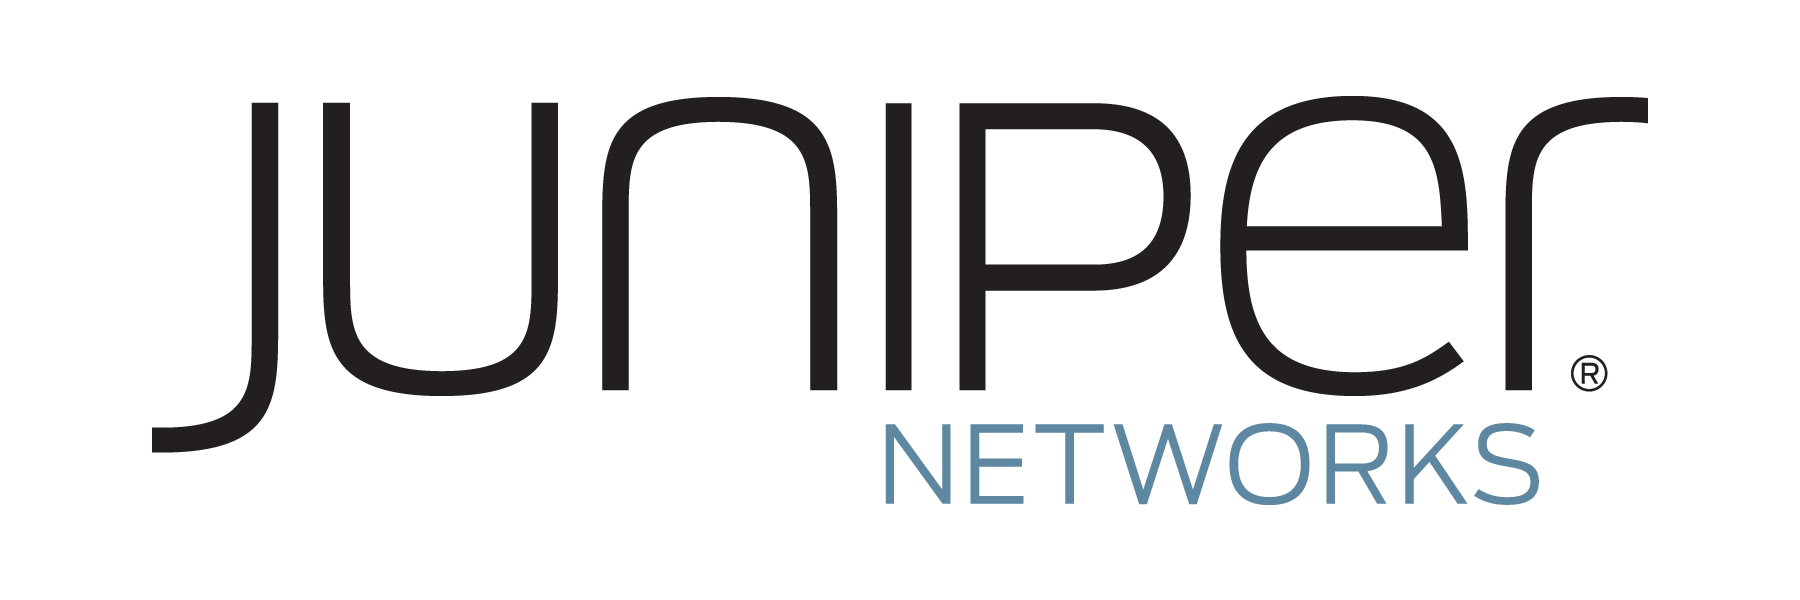 Contrail Systems (Juniper Networks)